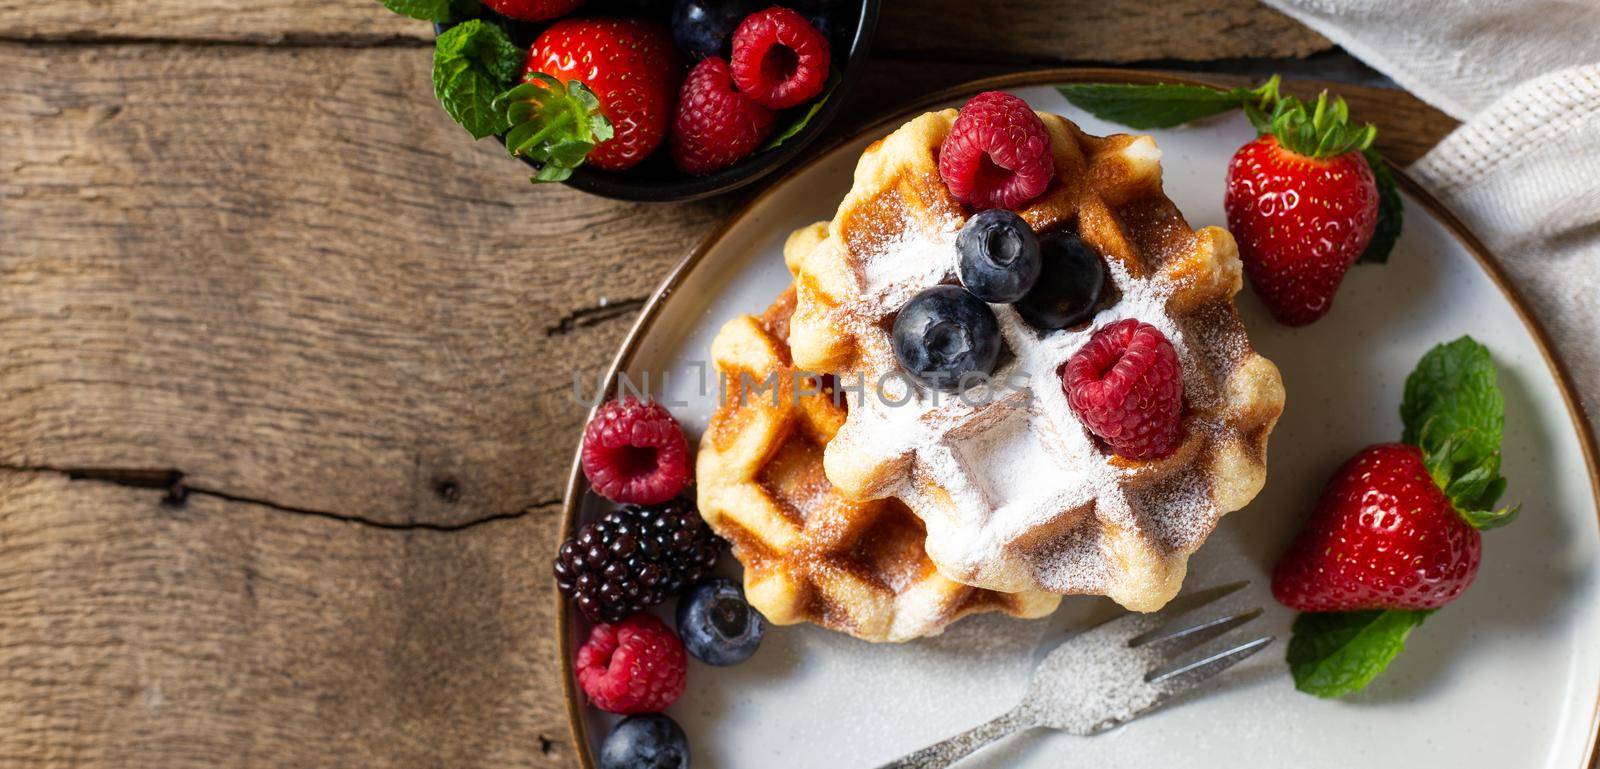 home made sweets with berries. Top view. Belgian waffles strawberries, blueberries on plate with canvas on old wood background. Breakfast on rustic kitchen